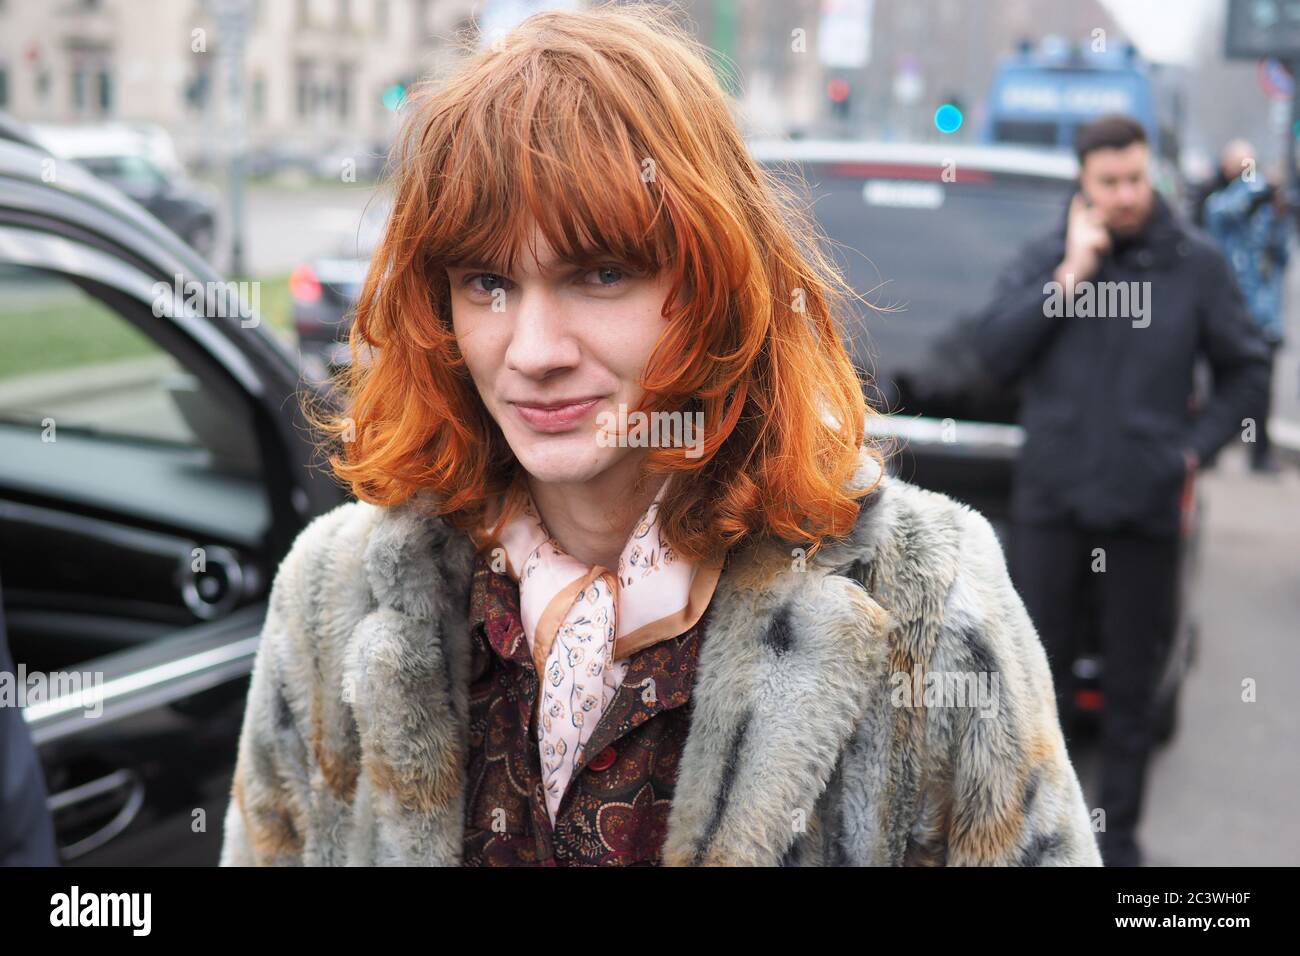 Milan, Italy, 14 January 2020: Fashion blogger street style outfit after Gucci fashion show during Milano fashion week 2020 Stock Photo